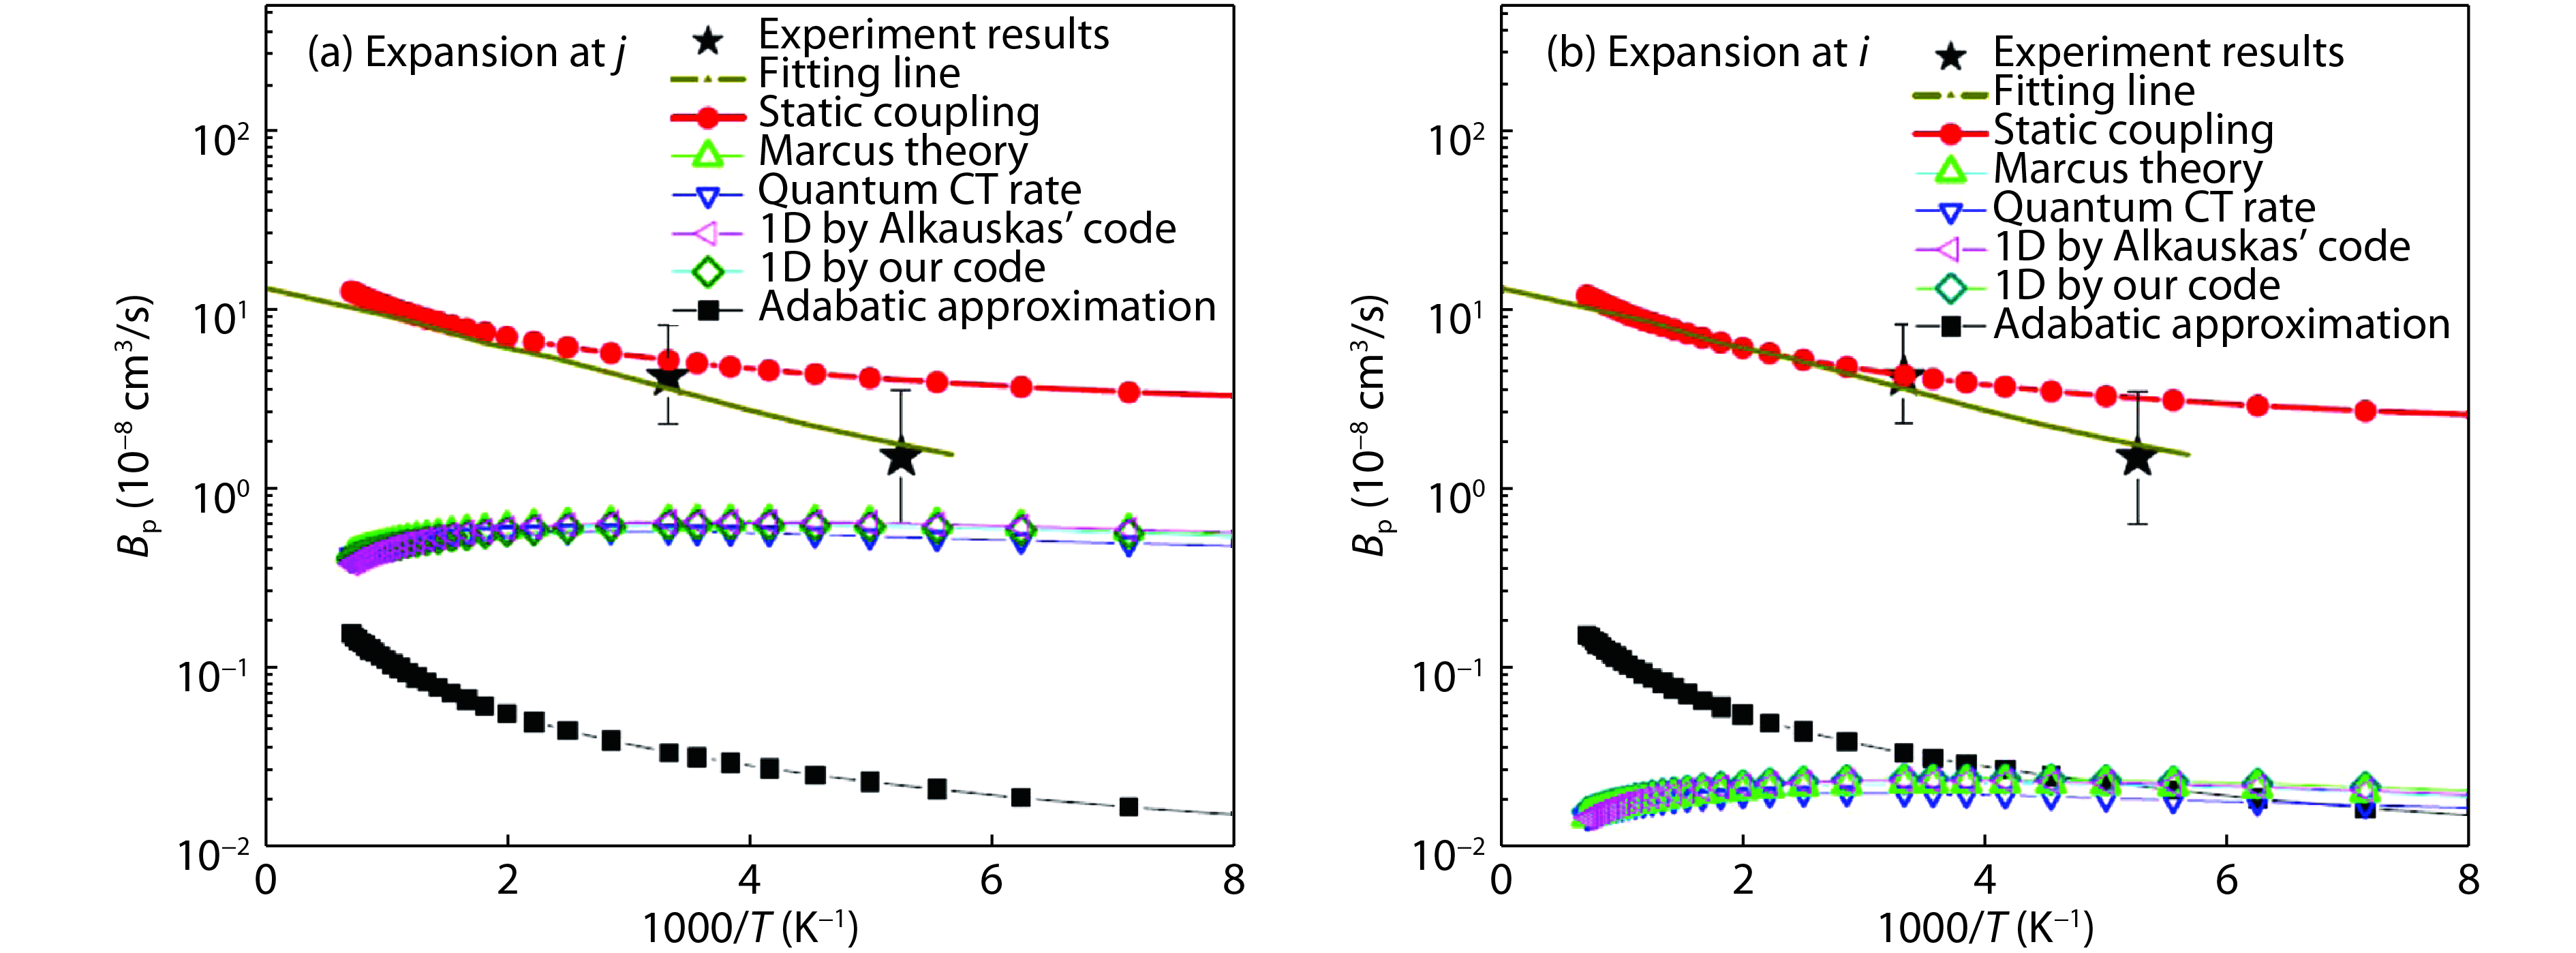 (Color online) The comparison of transition rates calculated using different formulas for the nonradiative transition of electron from the conduction band of bulk GaP to the ZnGa + OP point defect. Marcus theory, quantum CT rate, 1D by Alkauskas's code, and 1D by our code, are all one dimensional models. They all give very similar results. Compared with experiment, the multiphonon static coupling formula gives the best results, while the adiabatic coupling results are almost two order of magnitudes smaller. In (a), the calculations are done using the as the perturbation starting point, while in (b), is used as the starting point. As one can see, the results of these two treatments are similar for the multiphonon formula of static coupling and adiabatic coupling. On the other hand, for all the 1D formula, the results are very different. The details of the calculations are described in Ref. [31]. The images are taken from Ref. [16] with permission.